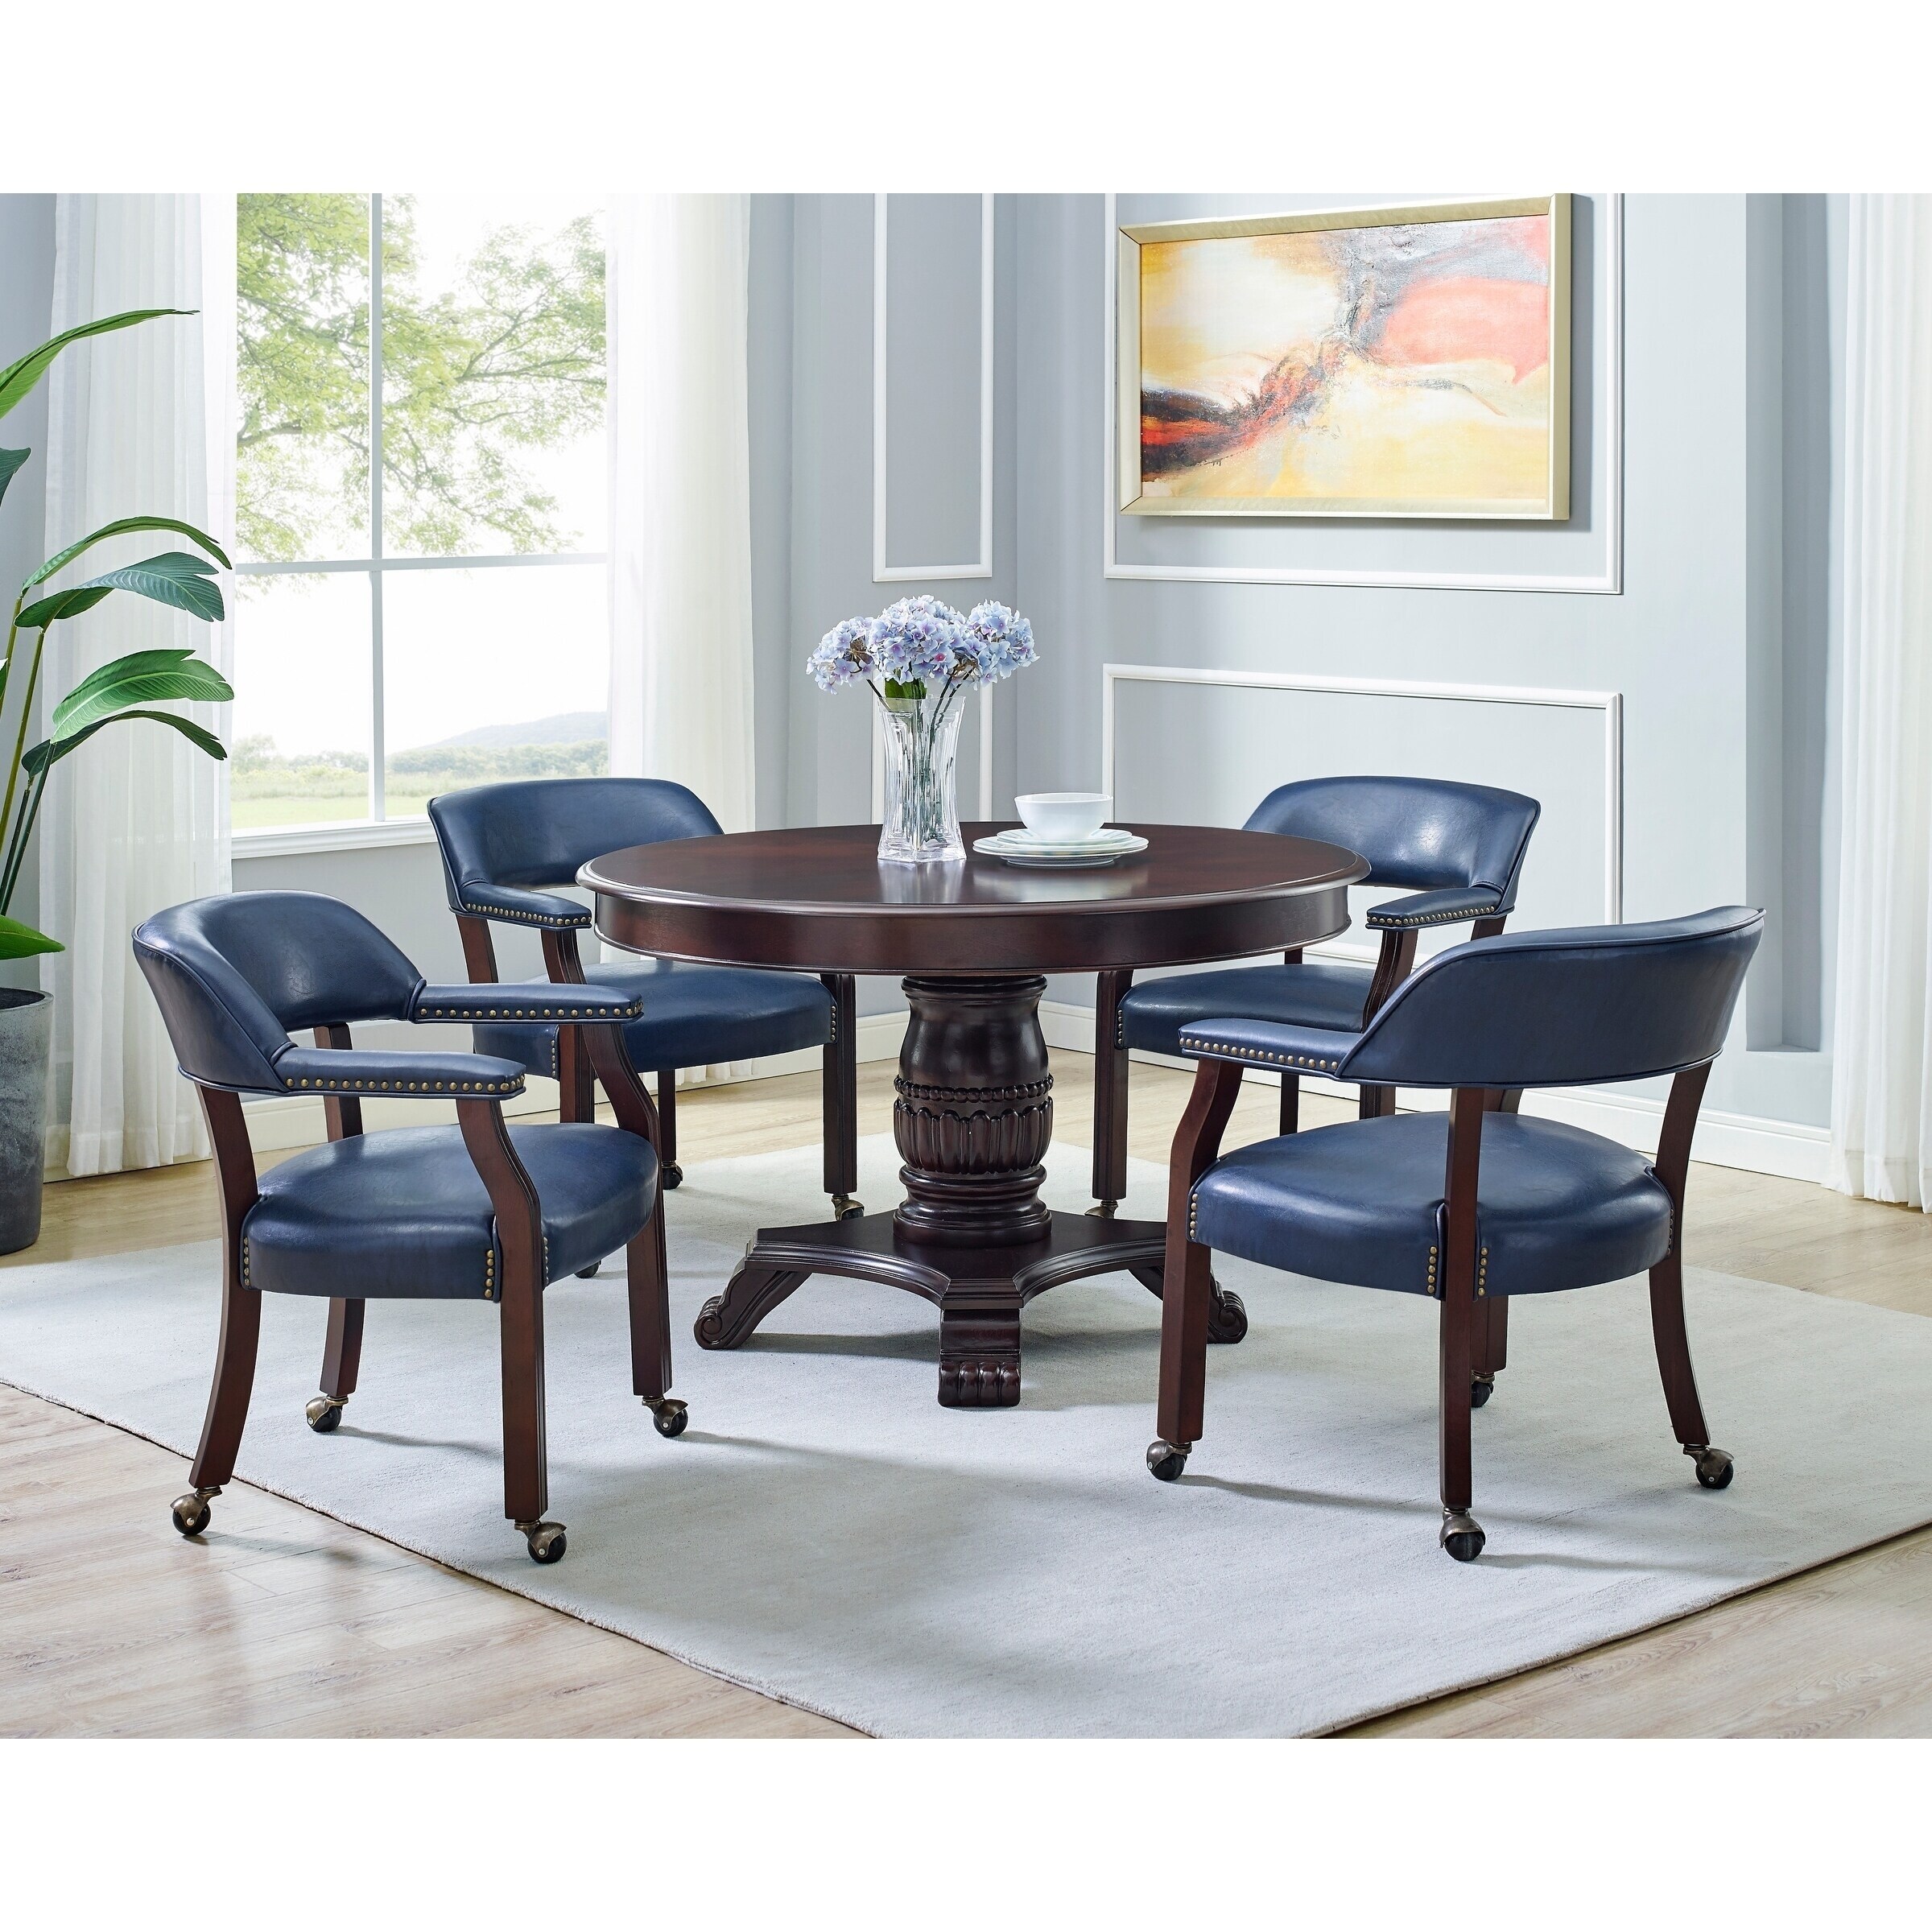 Details about   Gracewood Hollow Broker Captains Chair Teal Traditional 